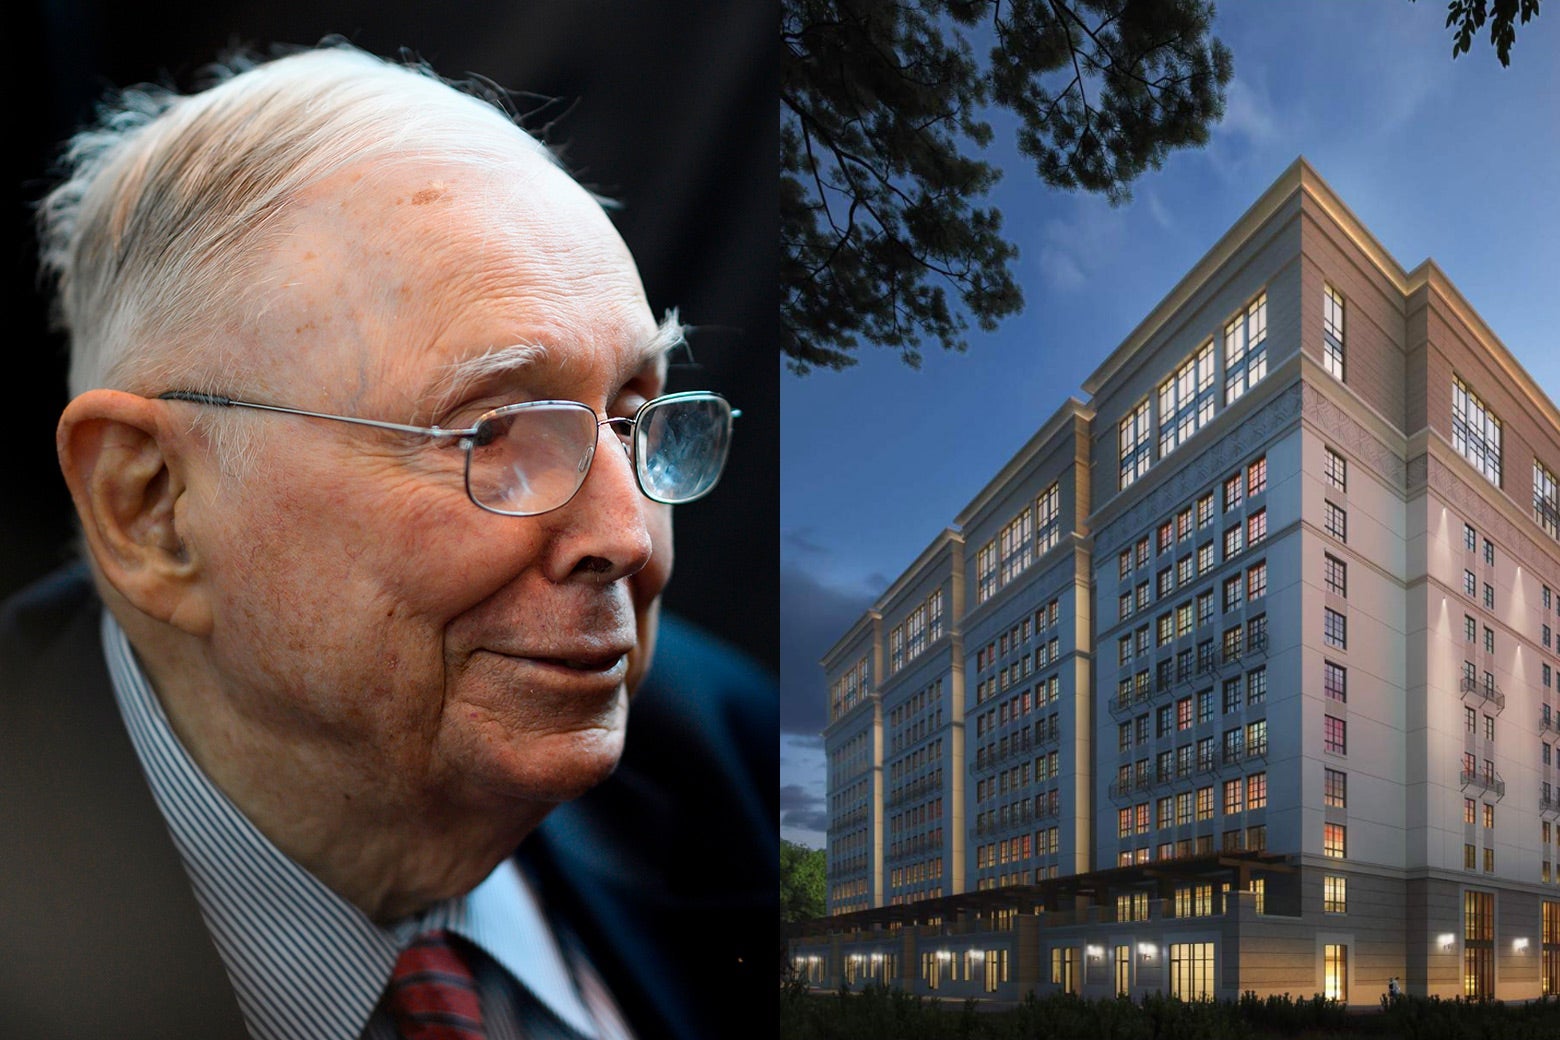 Photo of Charlie Munger next to a rendering of a hulking boxy dorm taking up a city block